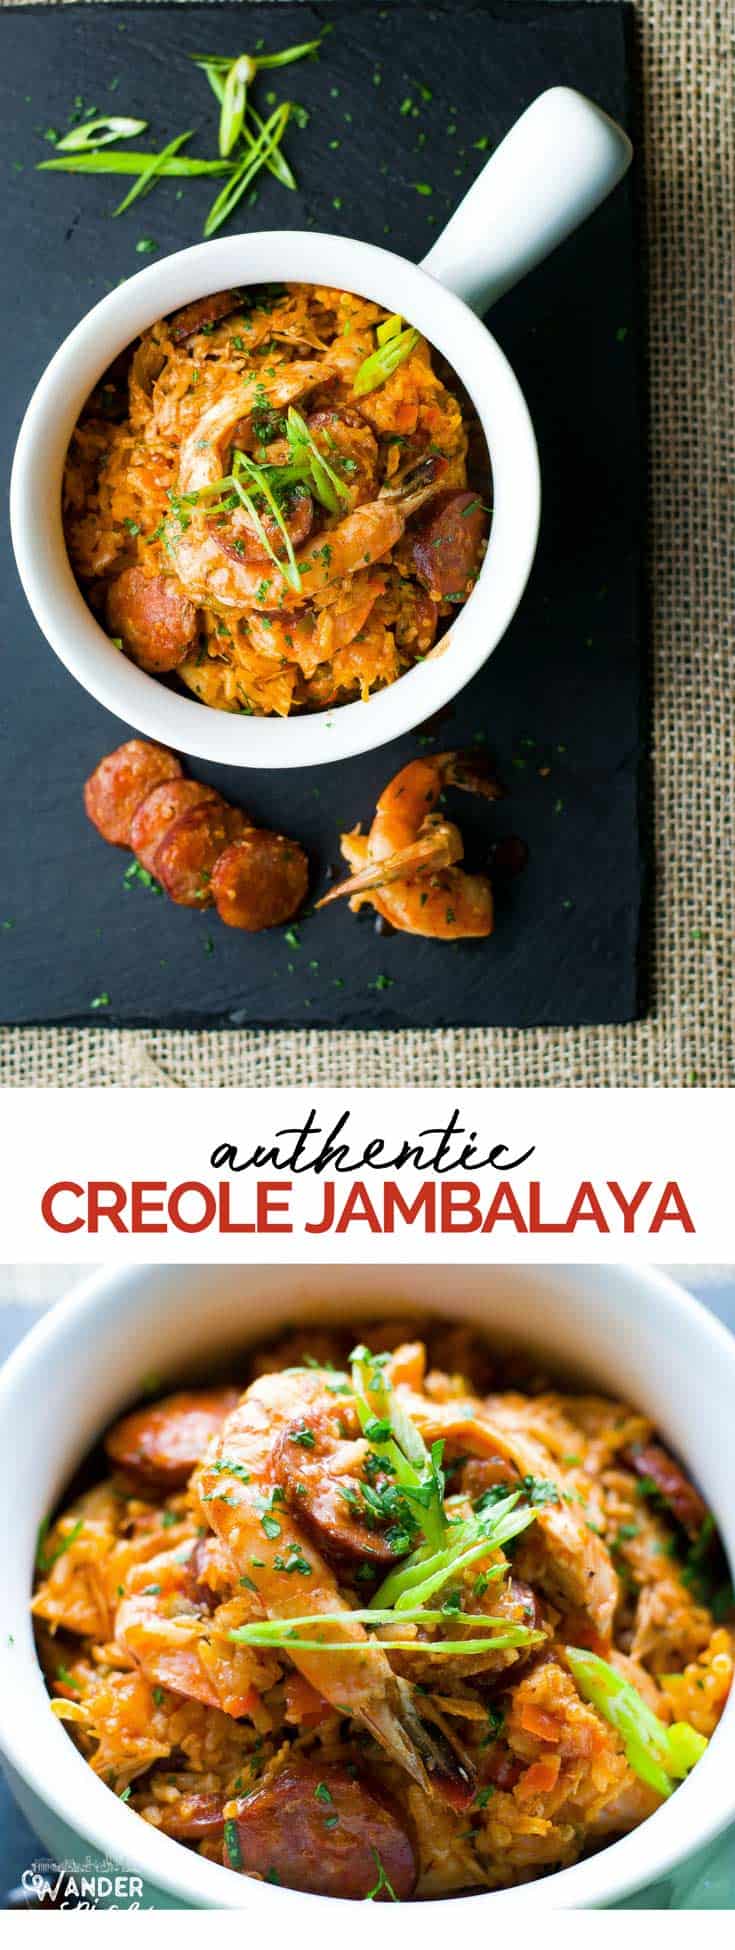 Easy Creole Jambalaya Recipe with Shrimp, Chicken, Sausage. Our authentic version is spicy and flavorful.